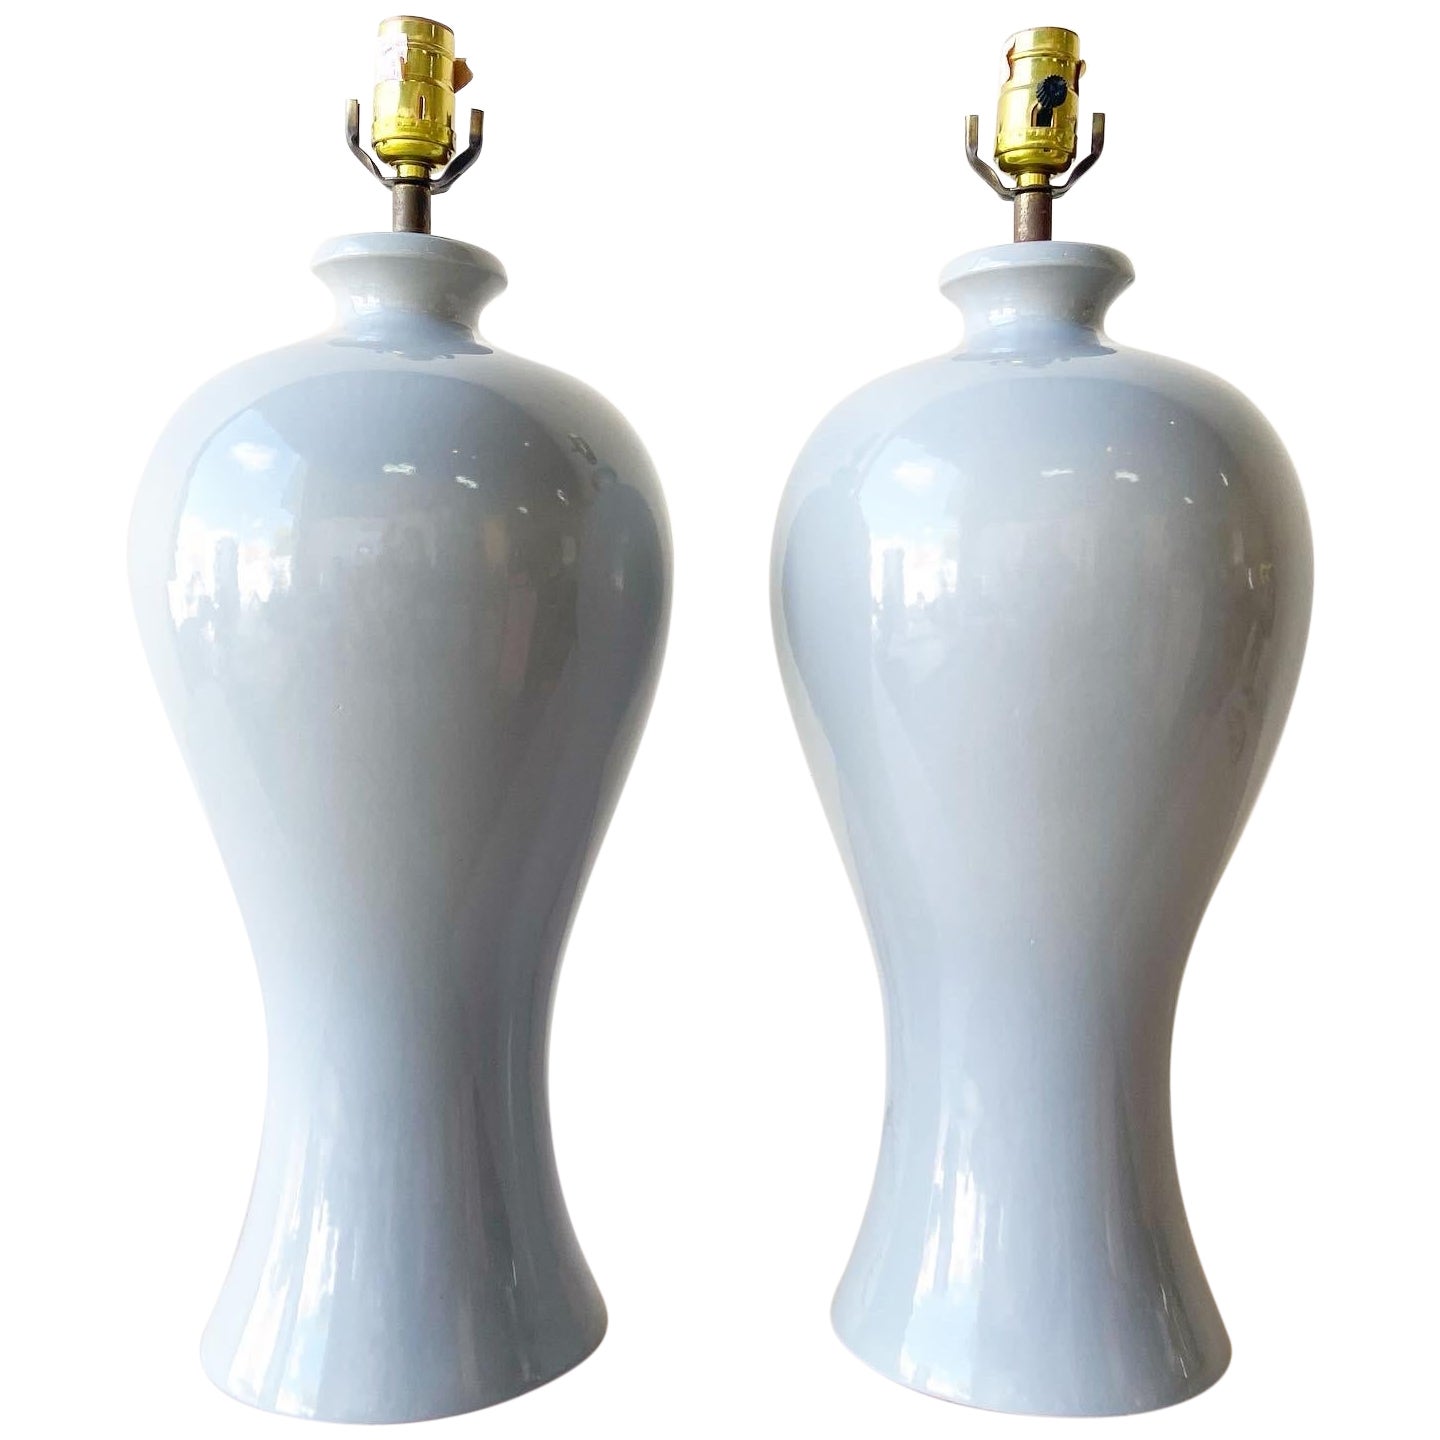 Postmodern Gray Porcelain Table Lamps – a Pair For Sale